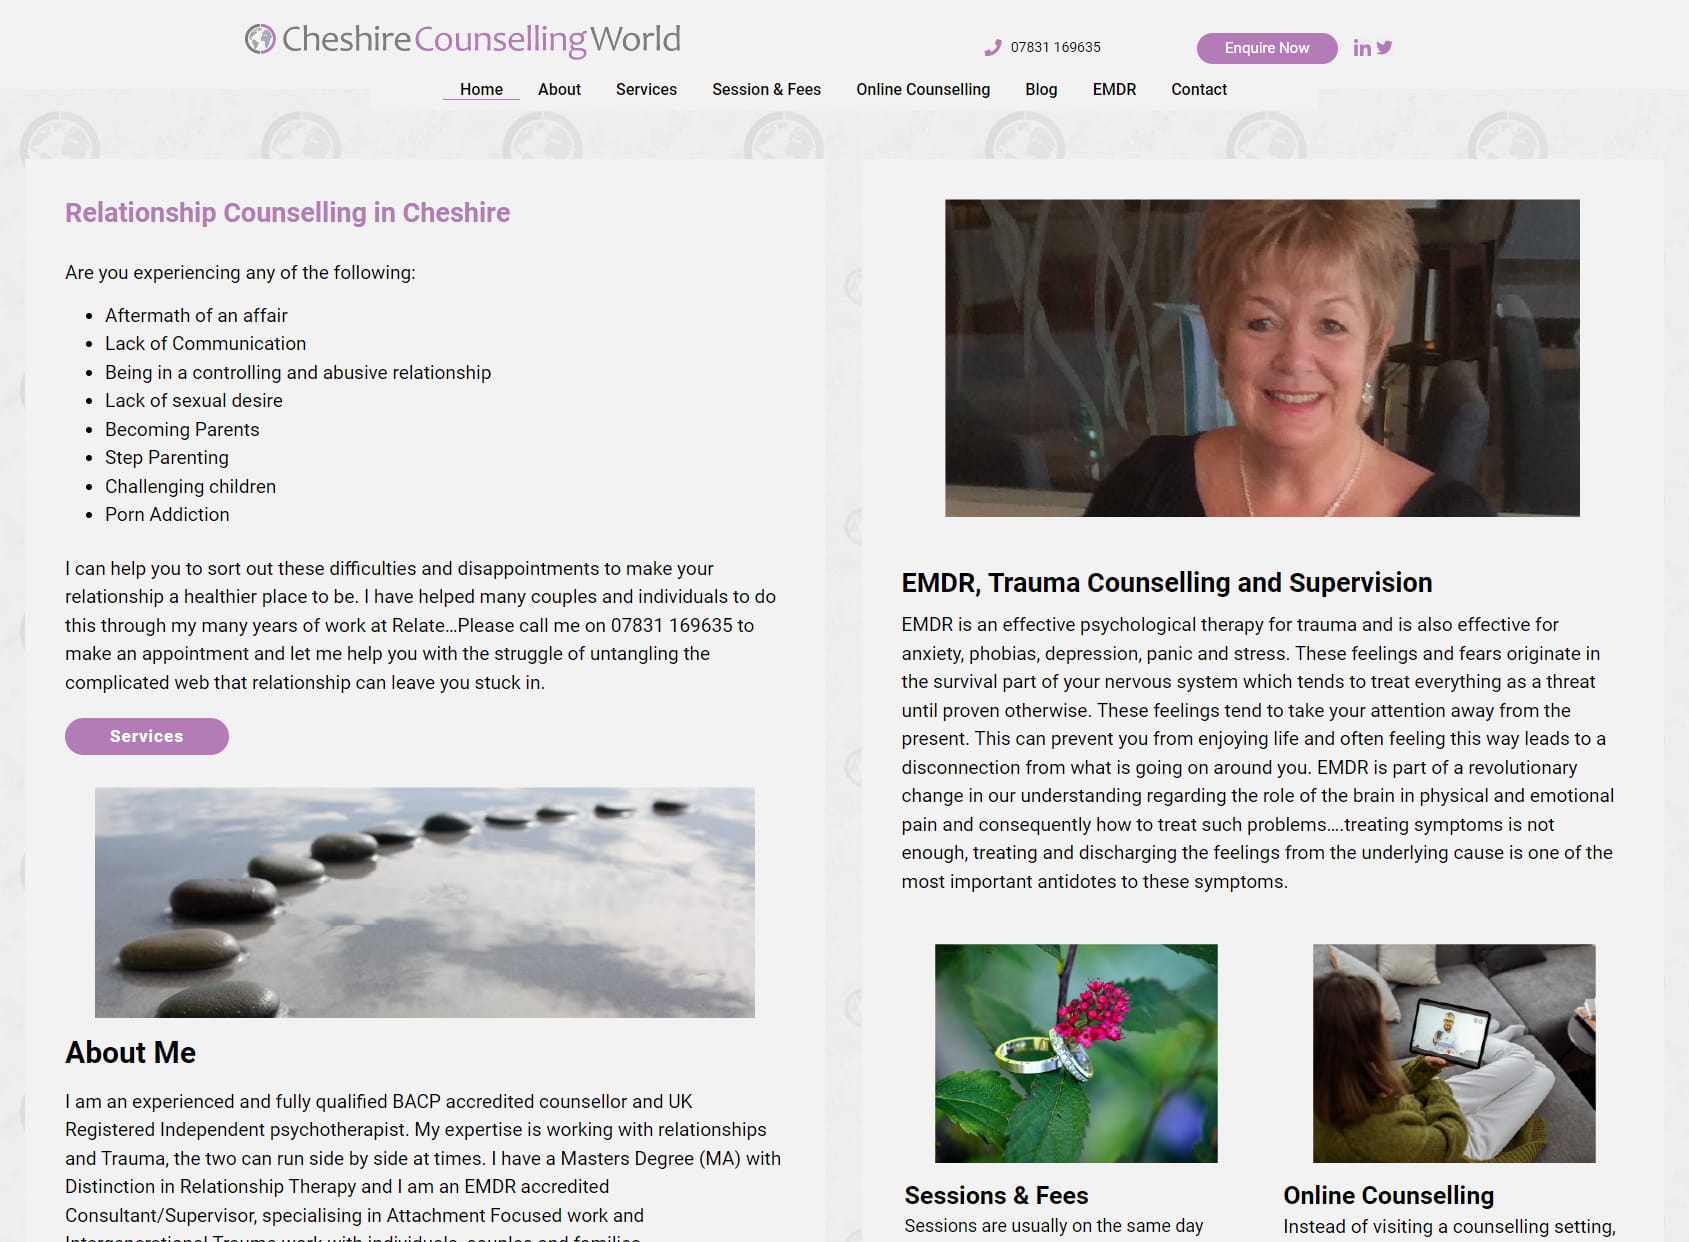 Cheshire Counselling World